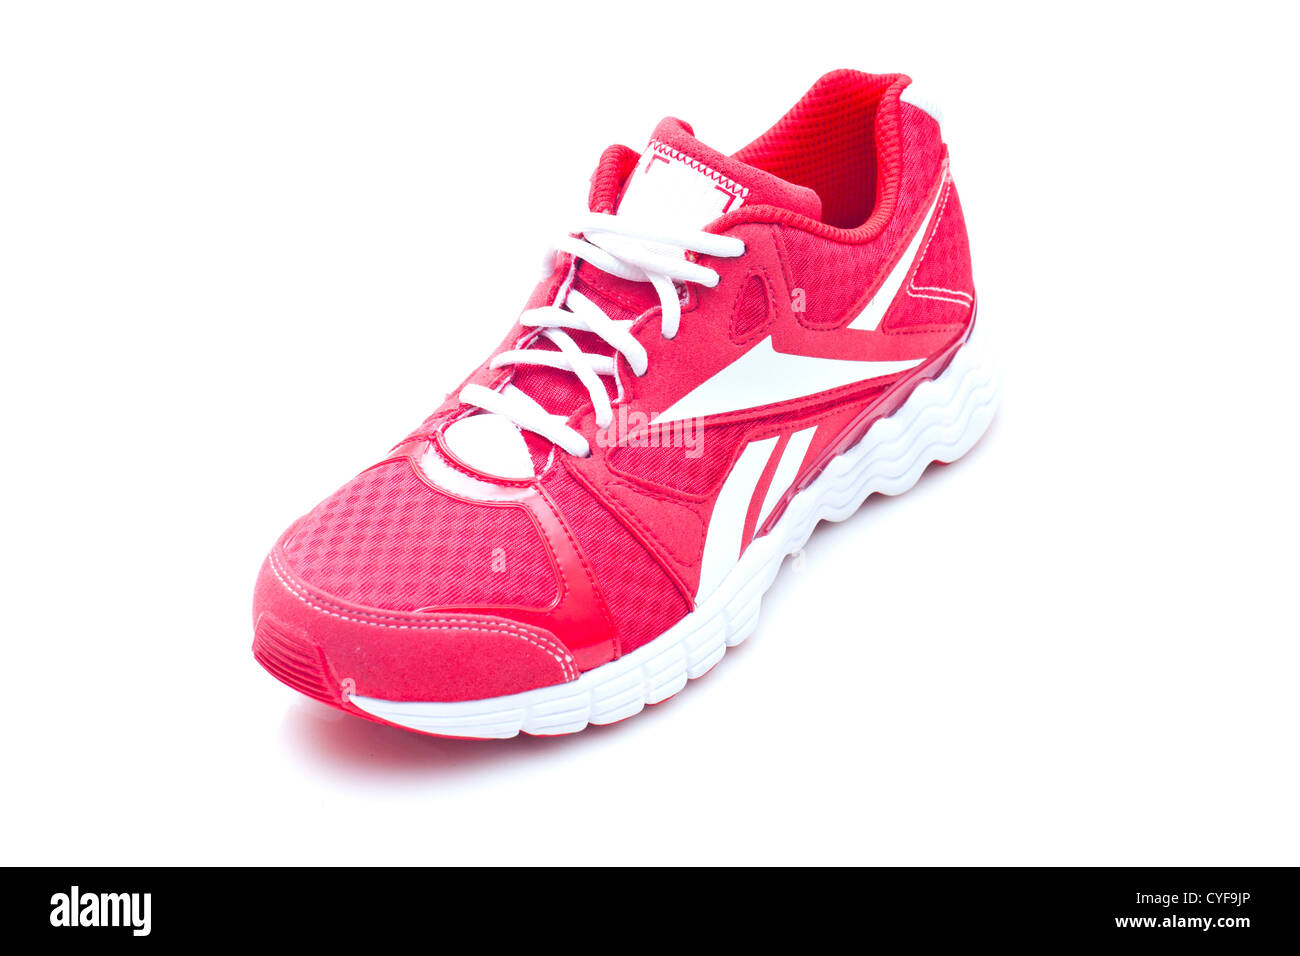 Red running sports shoes Stock Photo